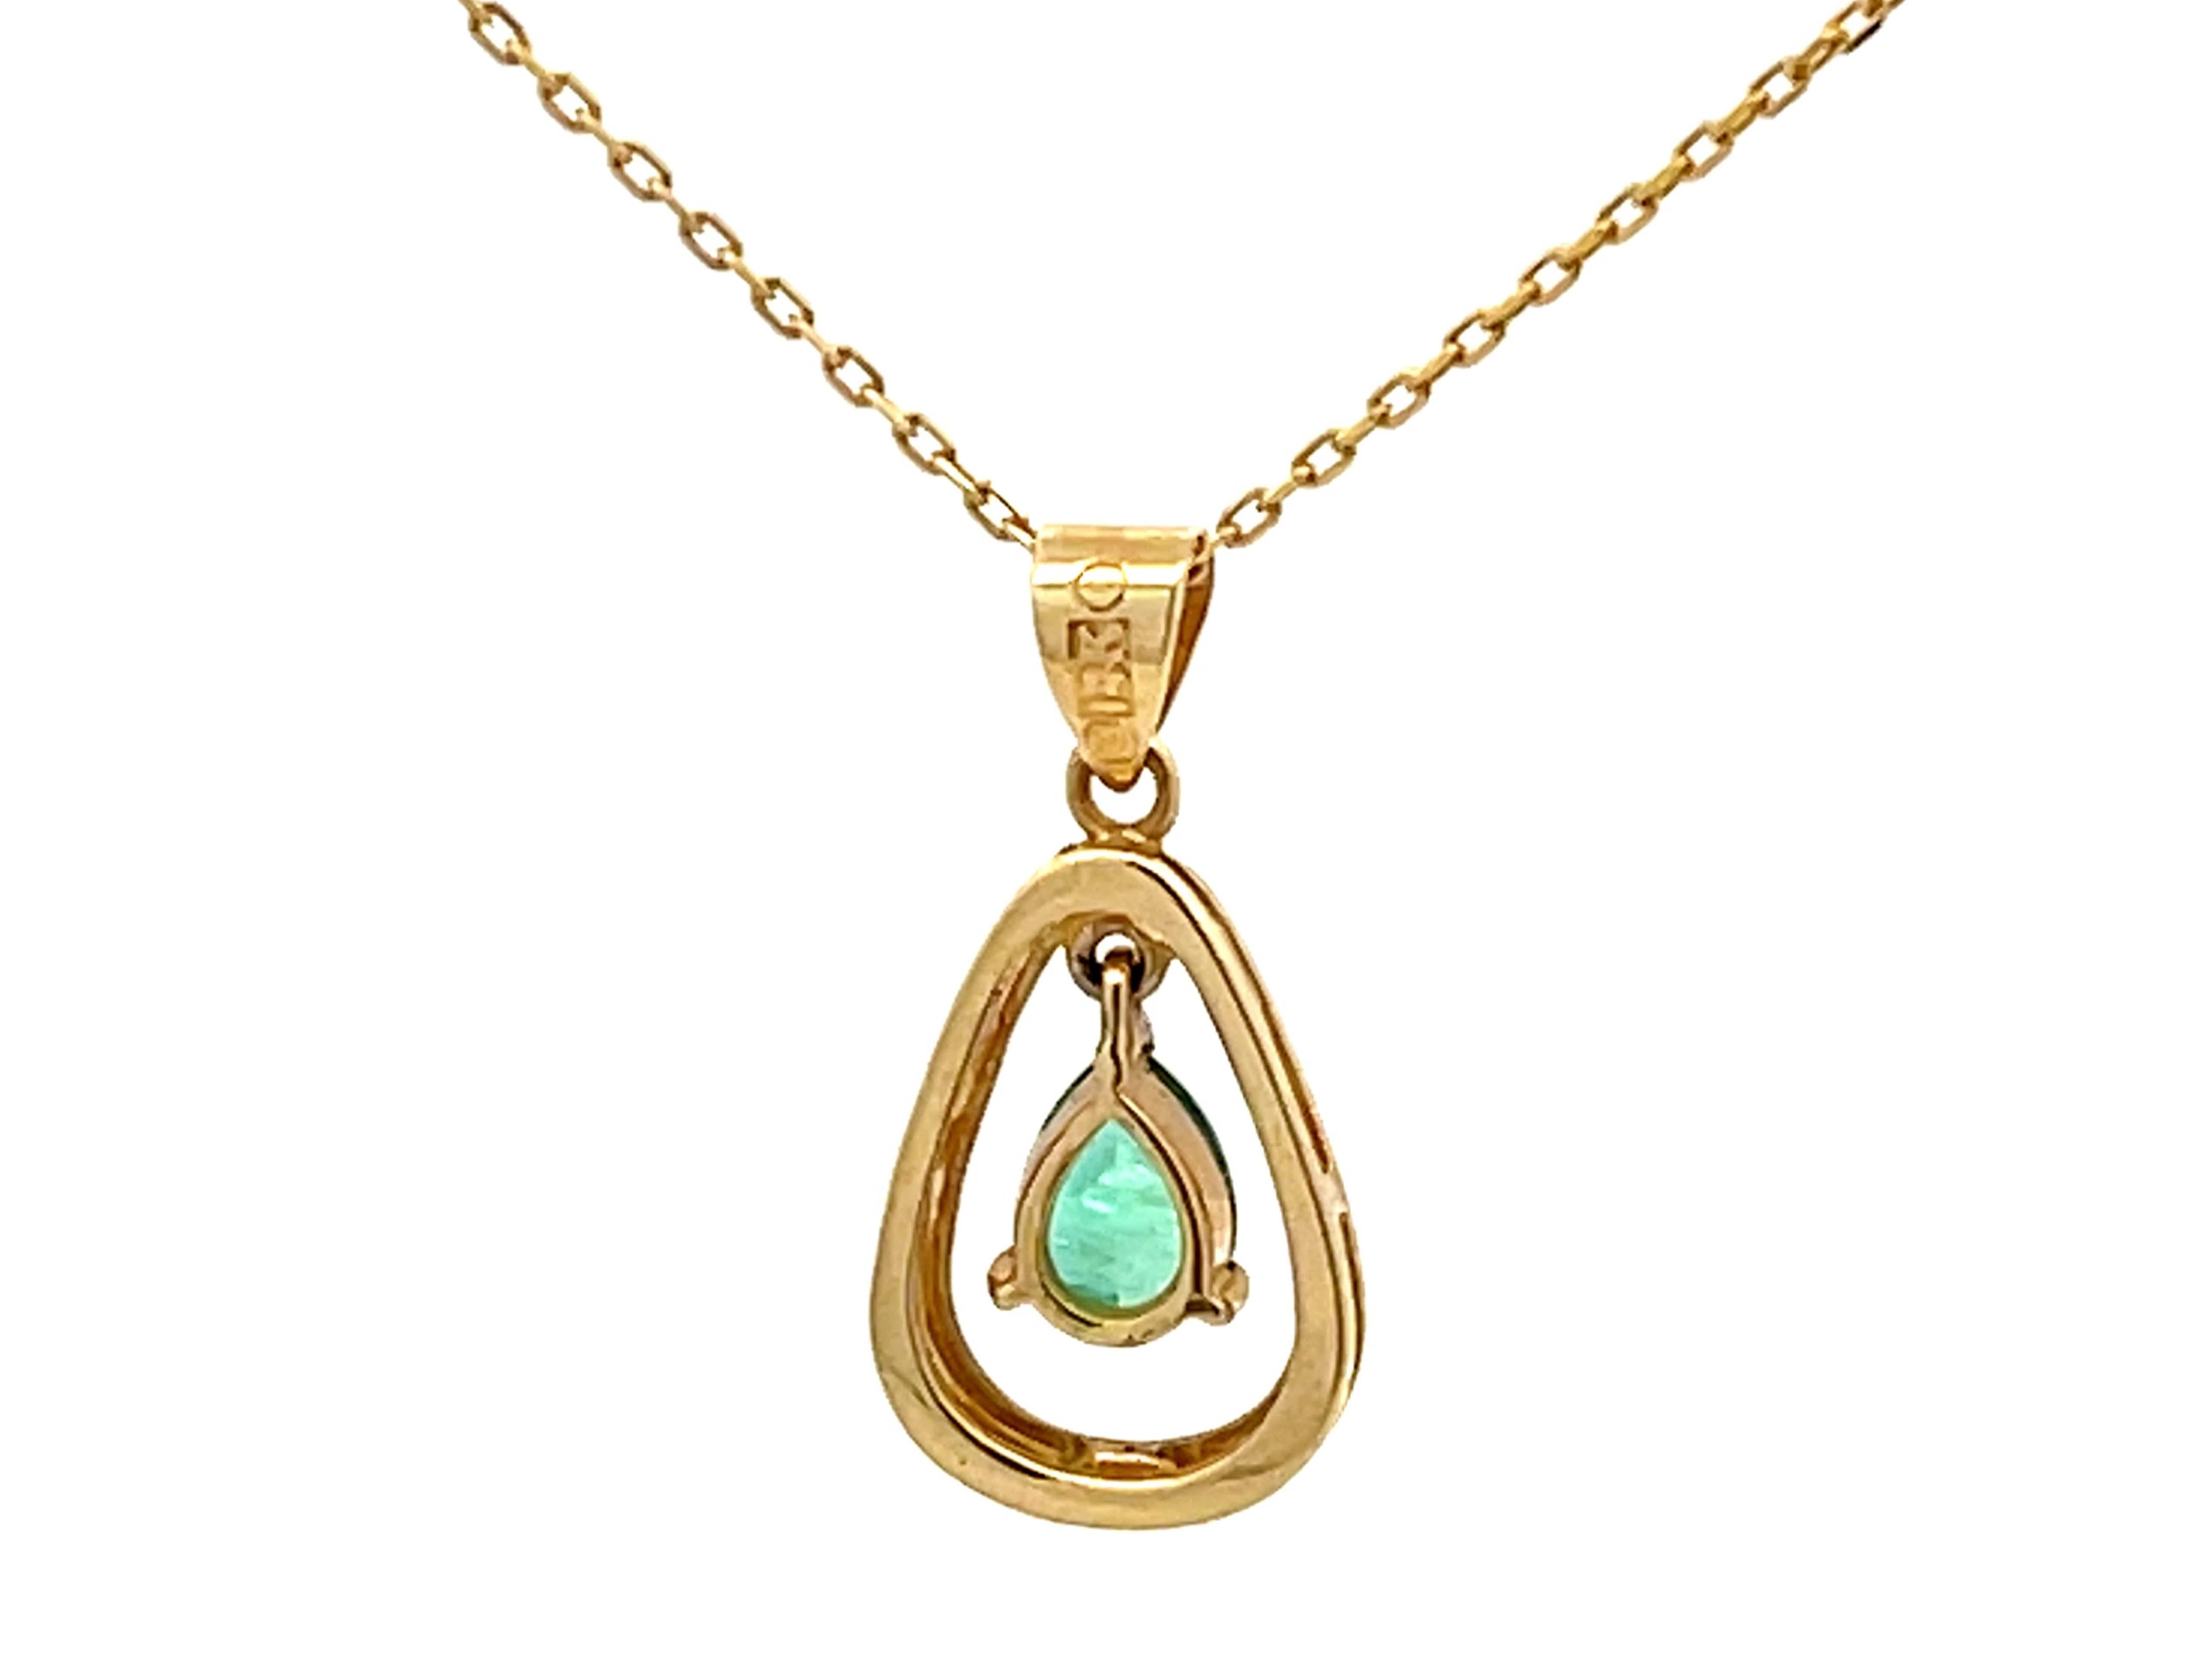 Dangly Pear Shaped Emerald Necklace 14K Yellow Gold For Sale 1